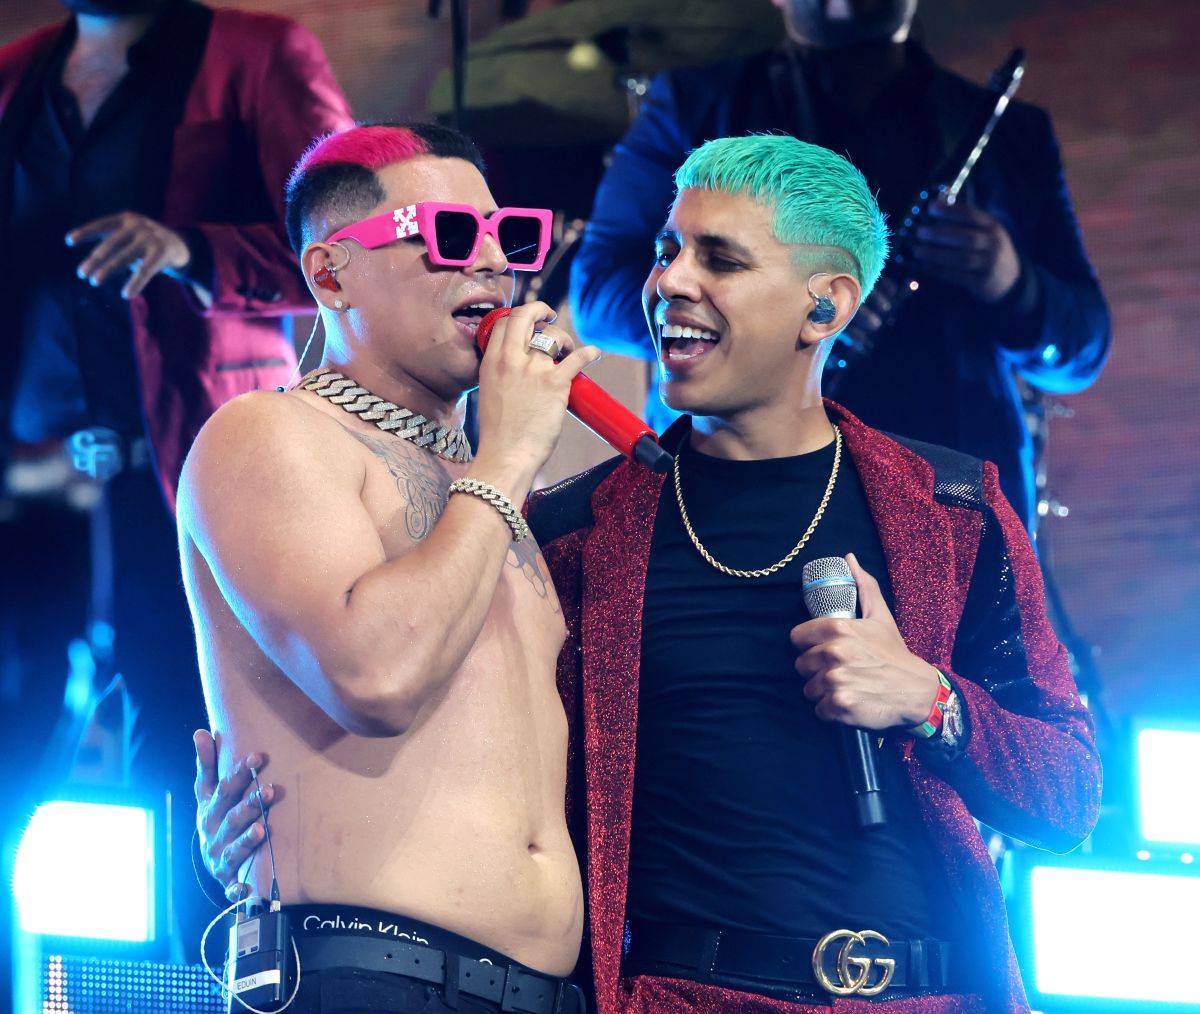 Eduin Caz left his brother Jhonny Caz in his underwear during the Grupo Firme concert